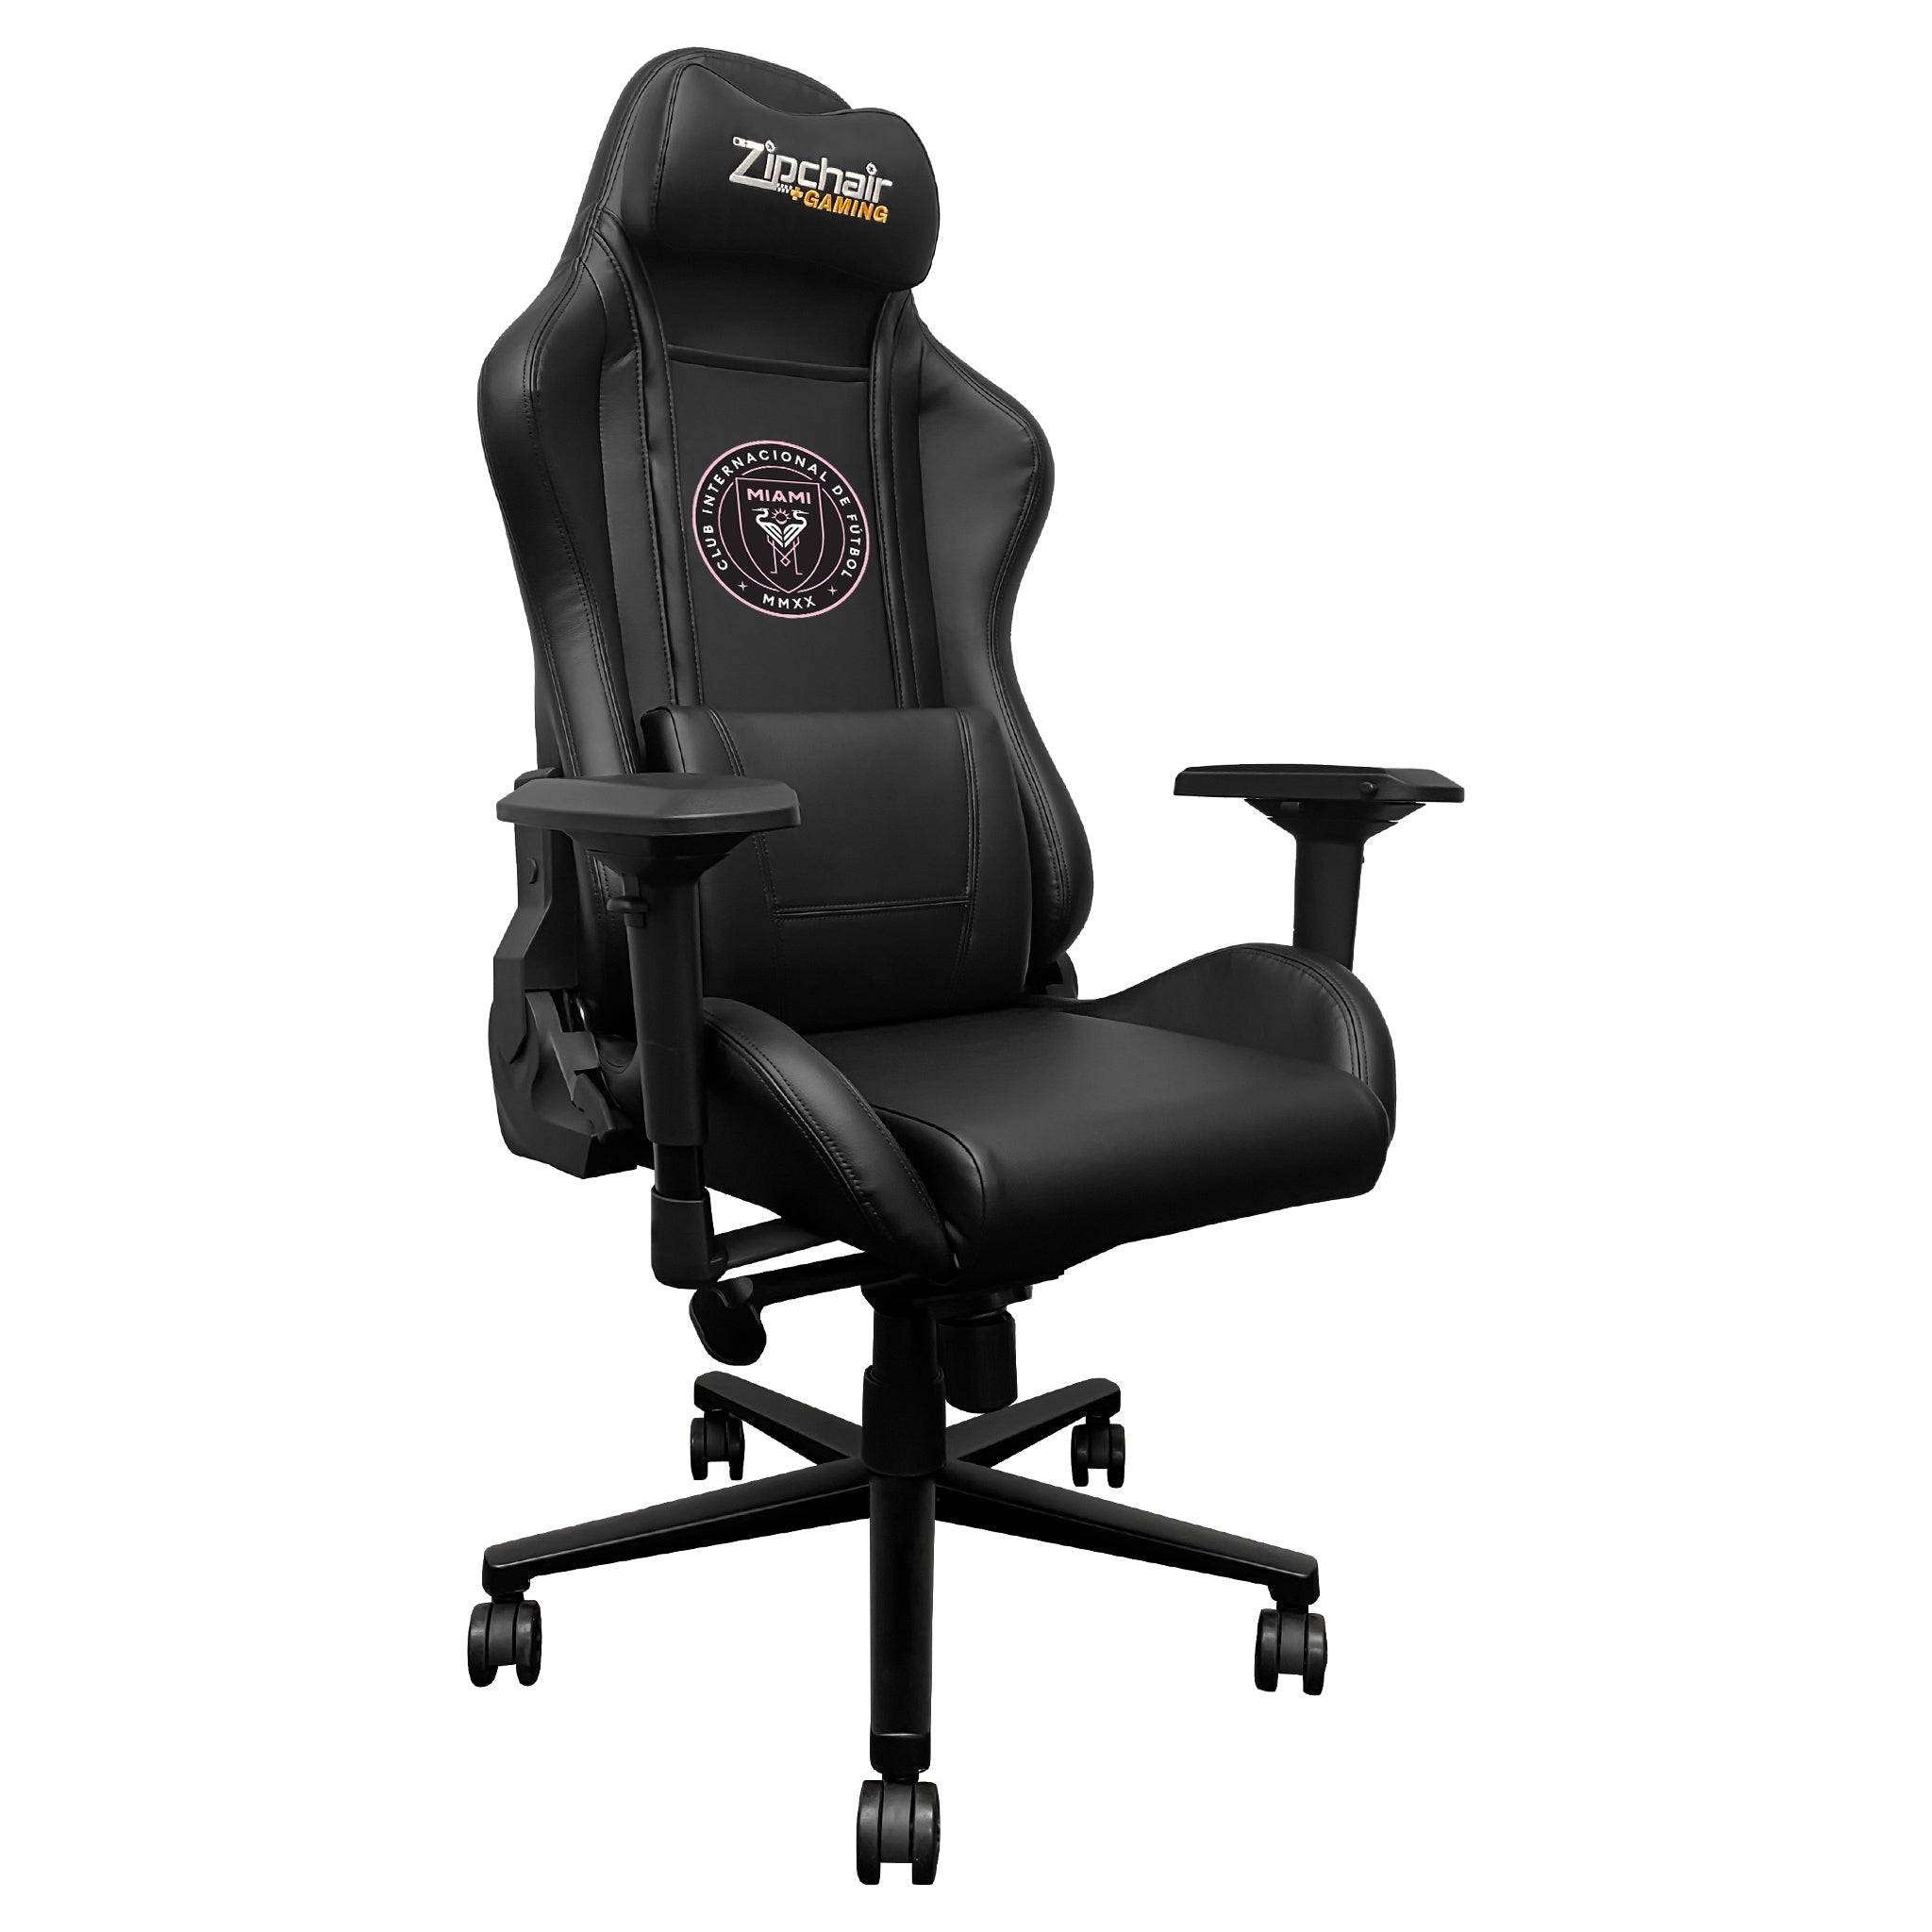 Xpression Gaming Chair with Inter Miami FC Logo – Zipchair